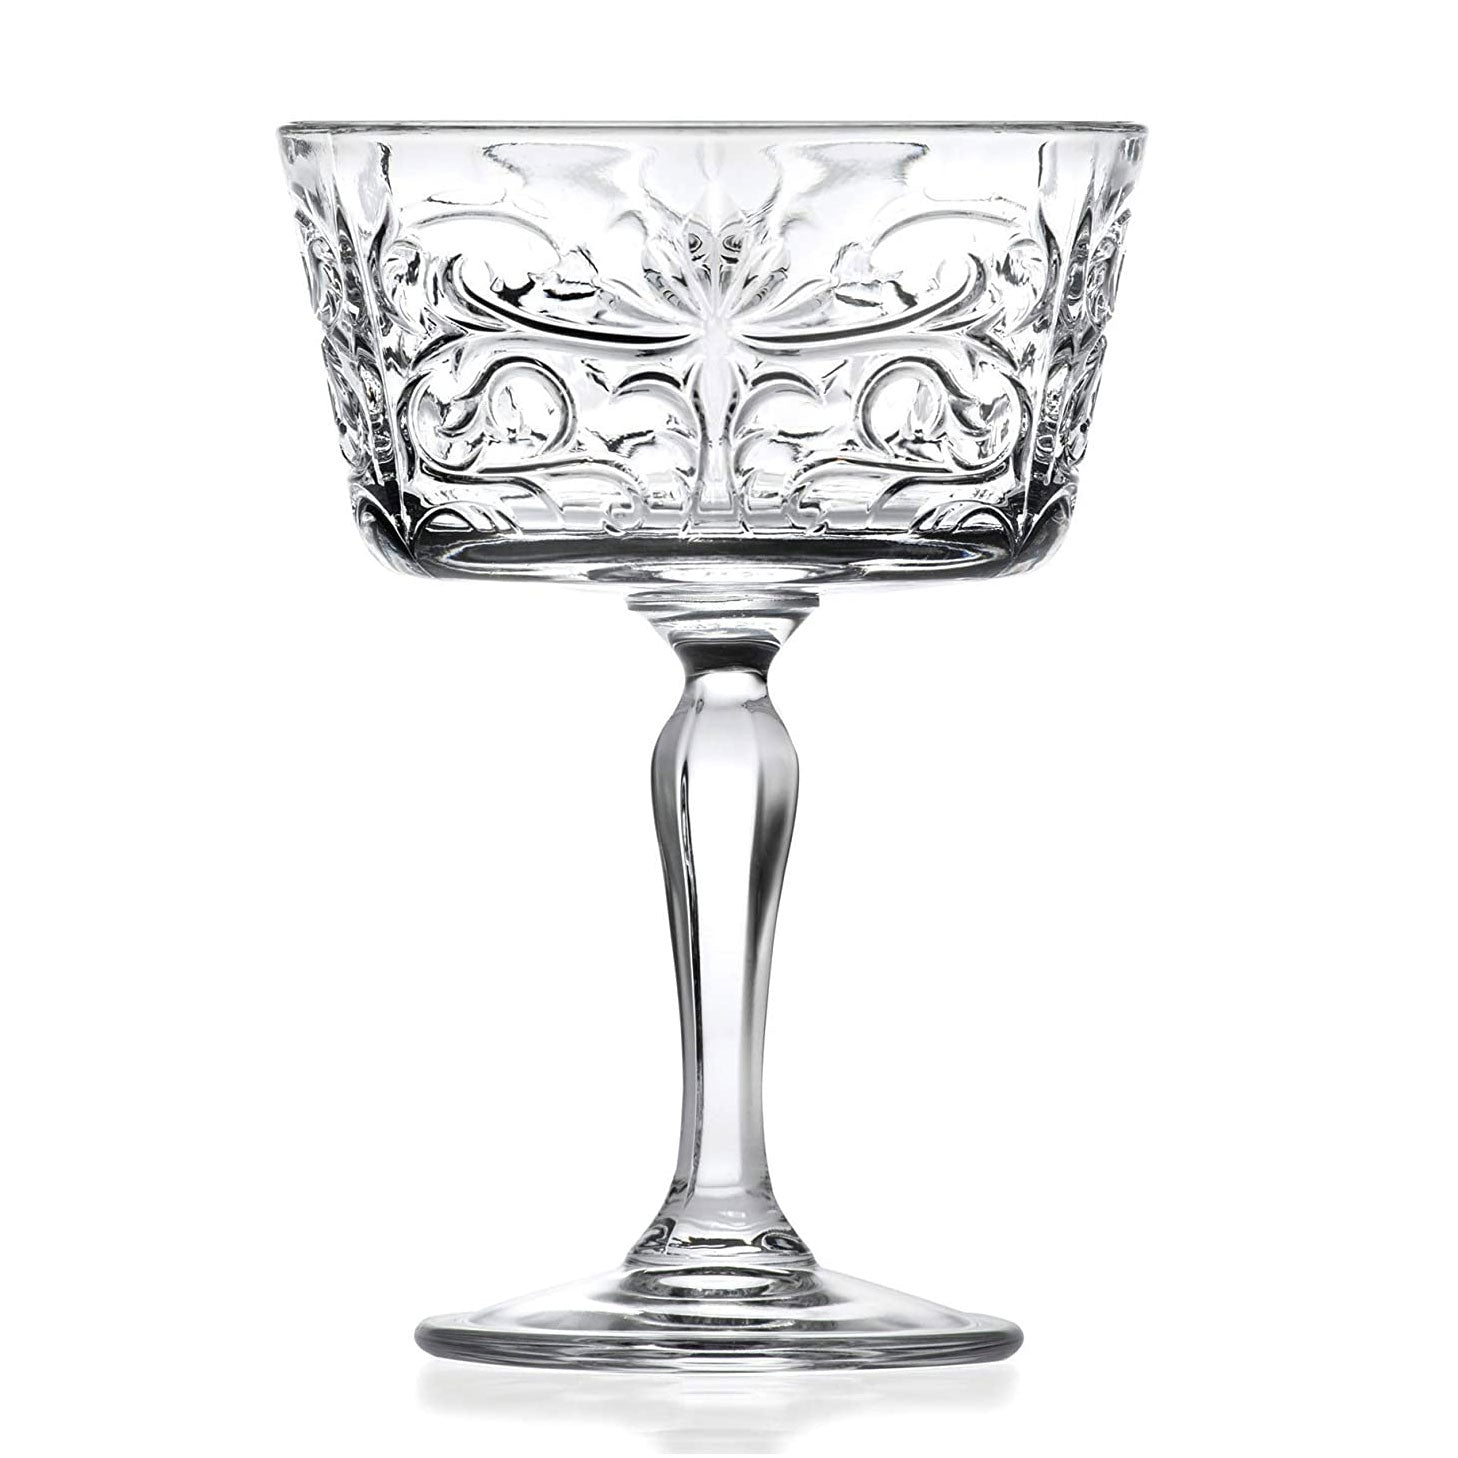 History Company “Paris Hotel Bar” 1930s Etched-Crystal Double-Sided Cocktail Jigger (Gift Box Collection)